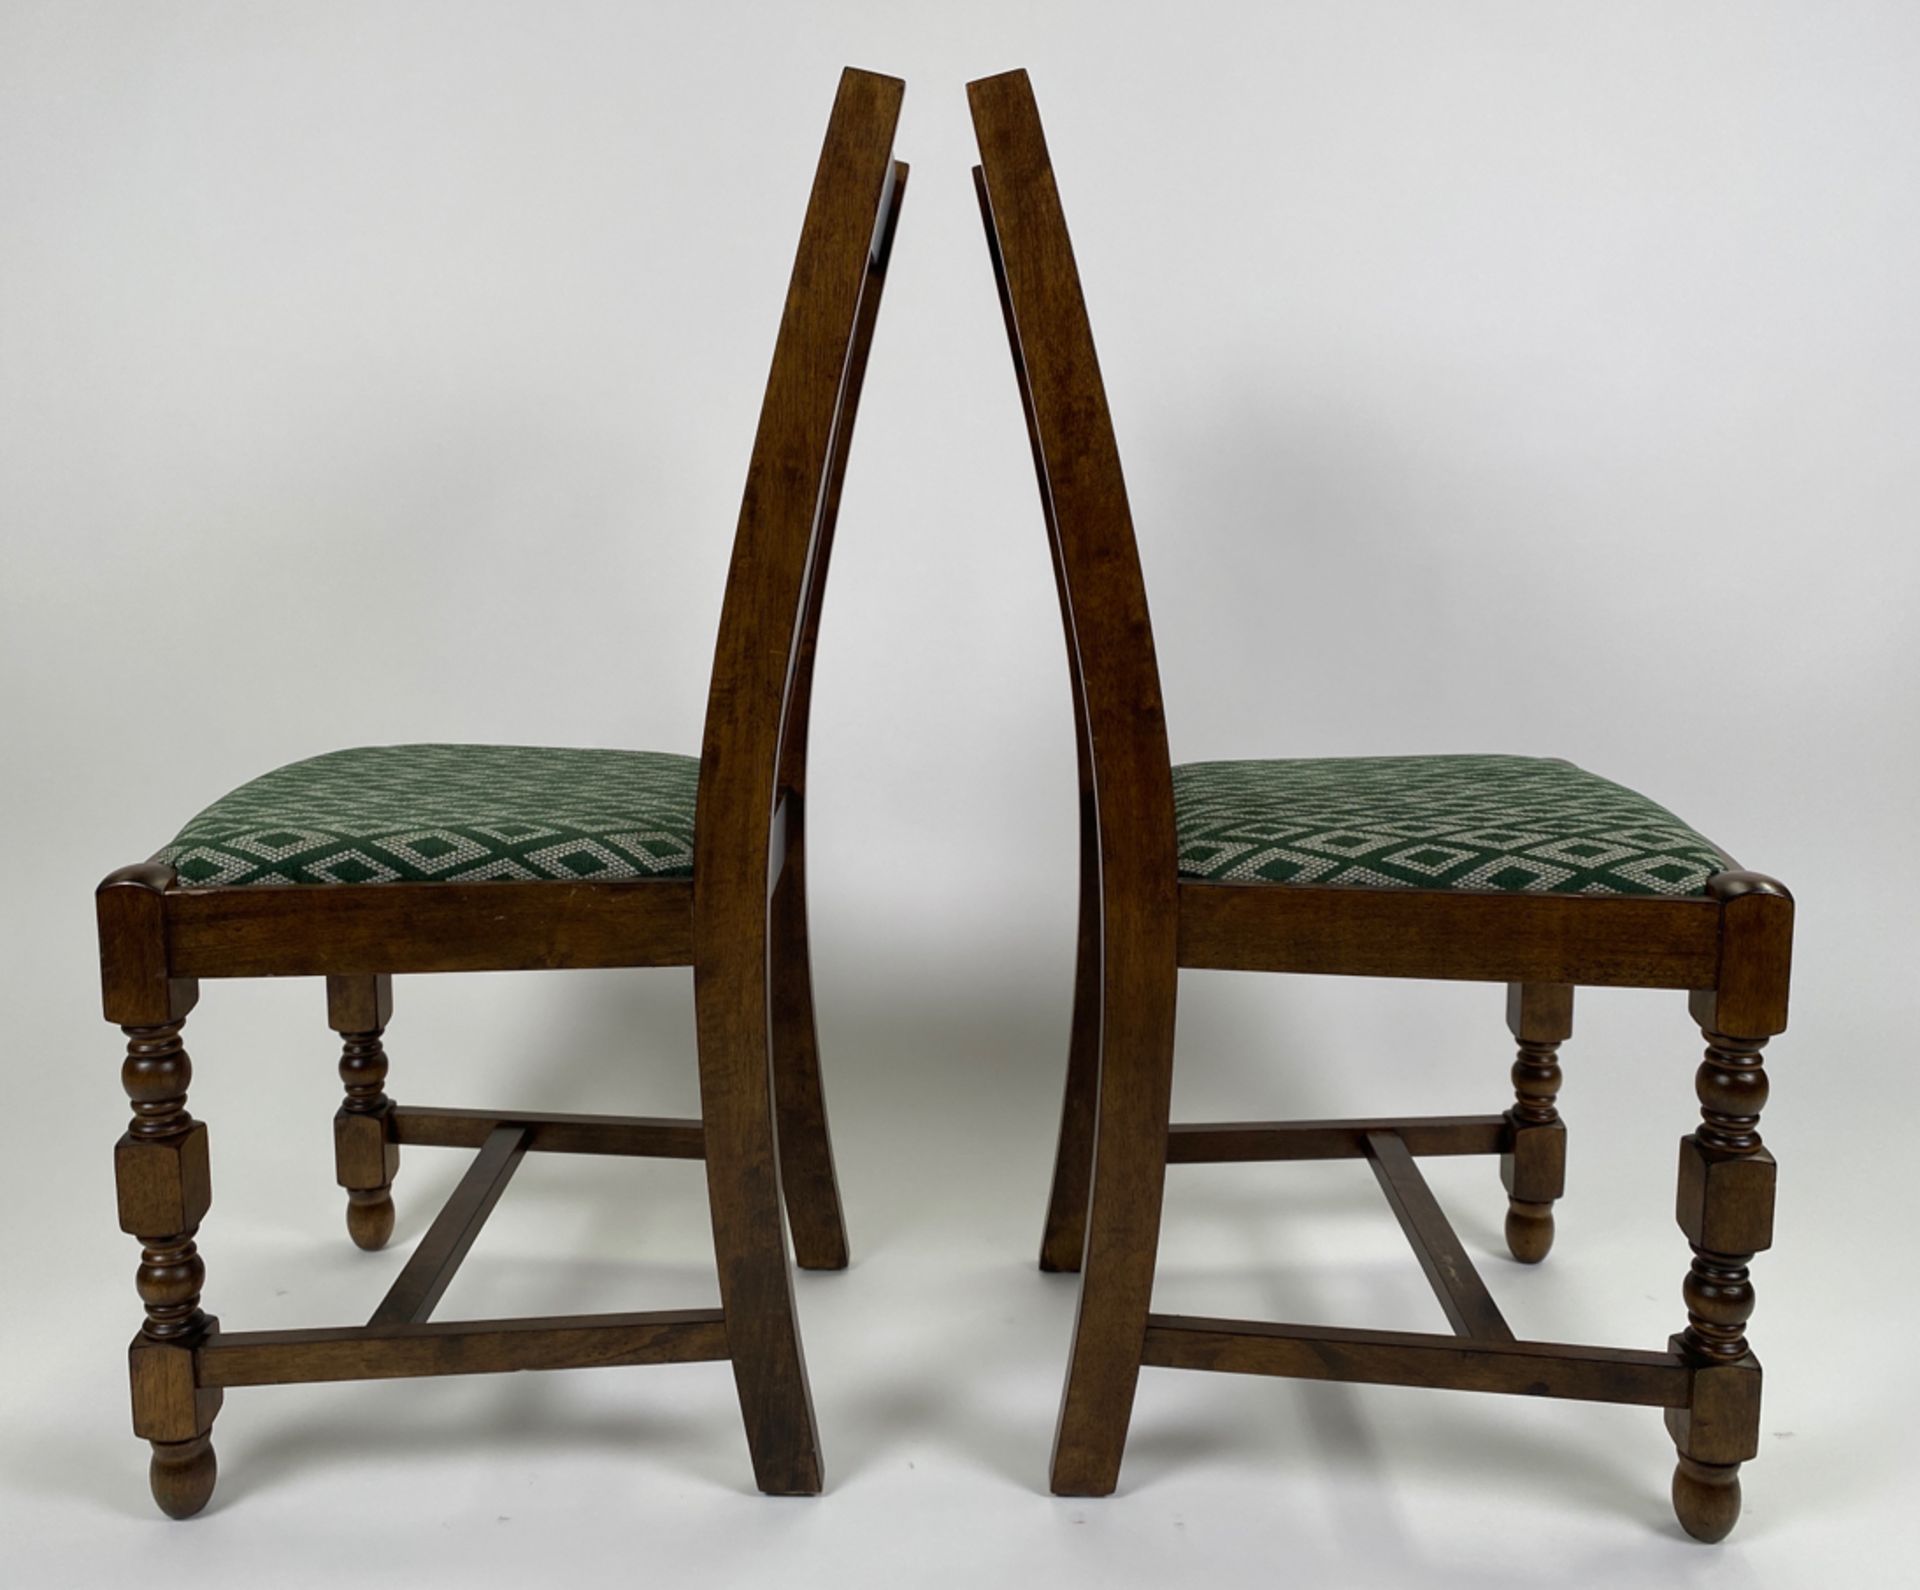 Mayfair Dining Chairs with Green Diamond Padded Seat - Image 4 of 5